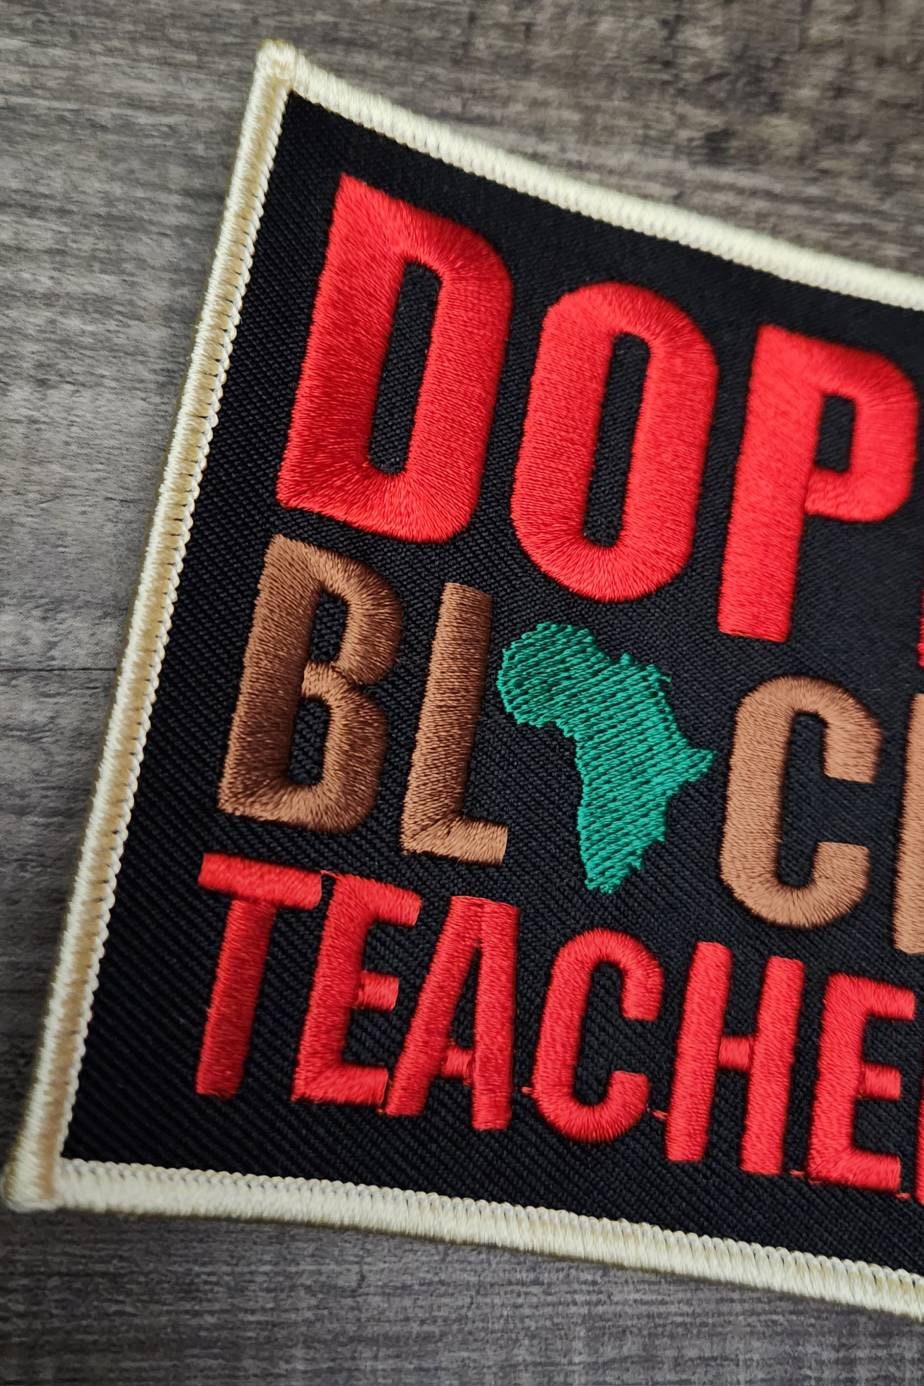 New, 1-pc "Dope Black Teacher" Teacher's Appreciation Gift | Iron-on Embroidery Patch | Size 3.65" Black Teacher Patch for Jackets